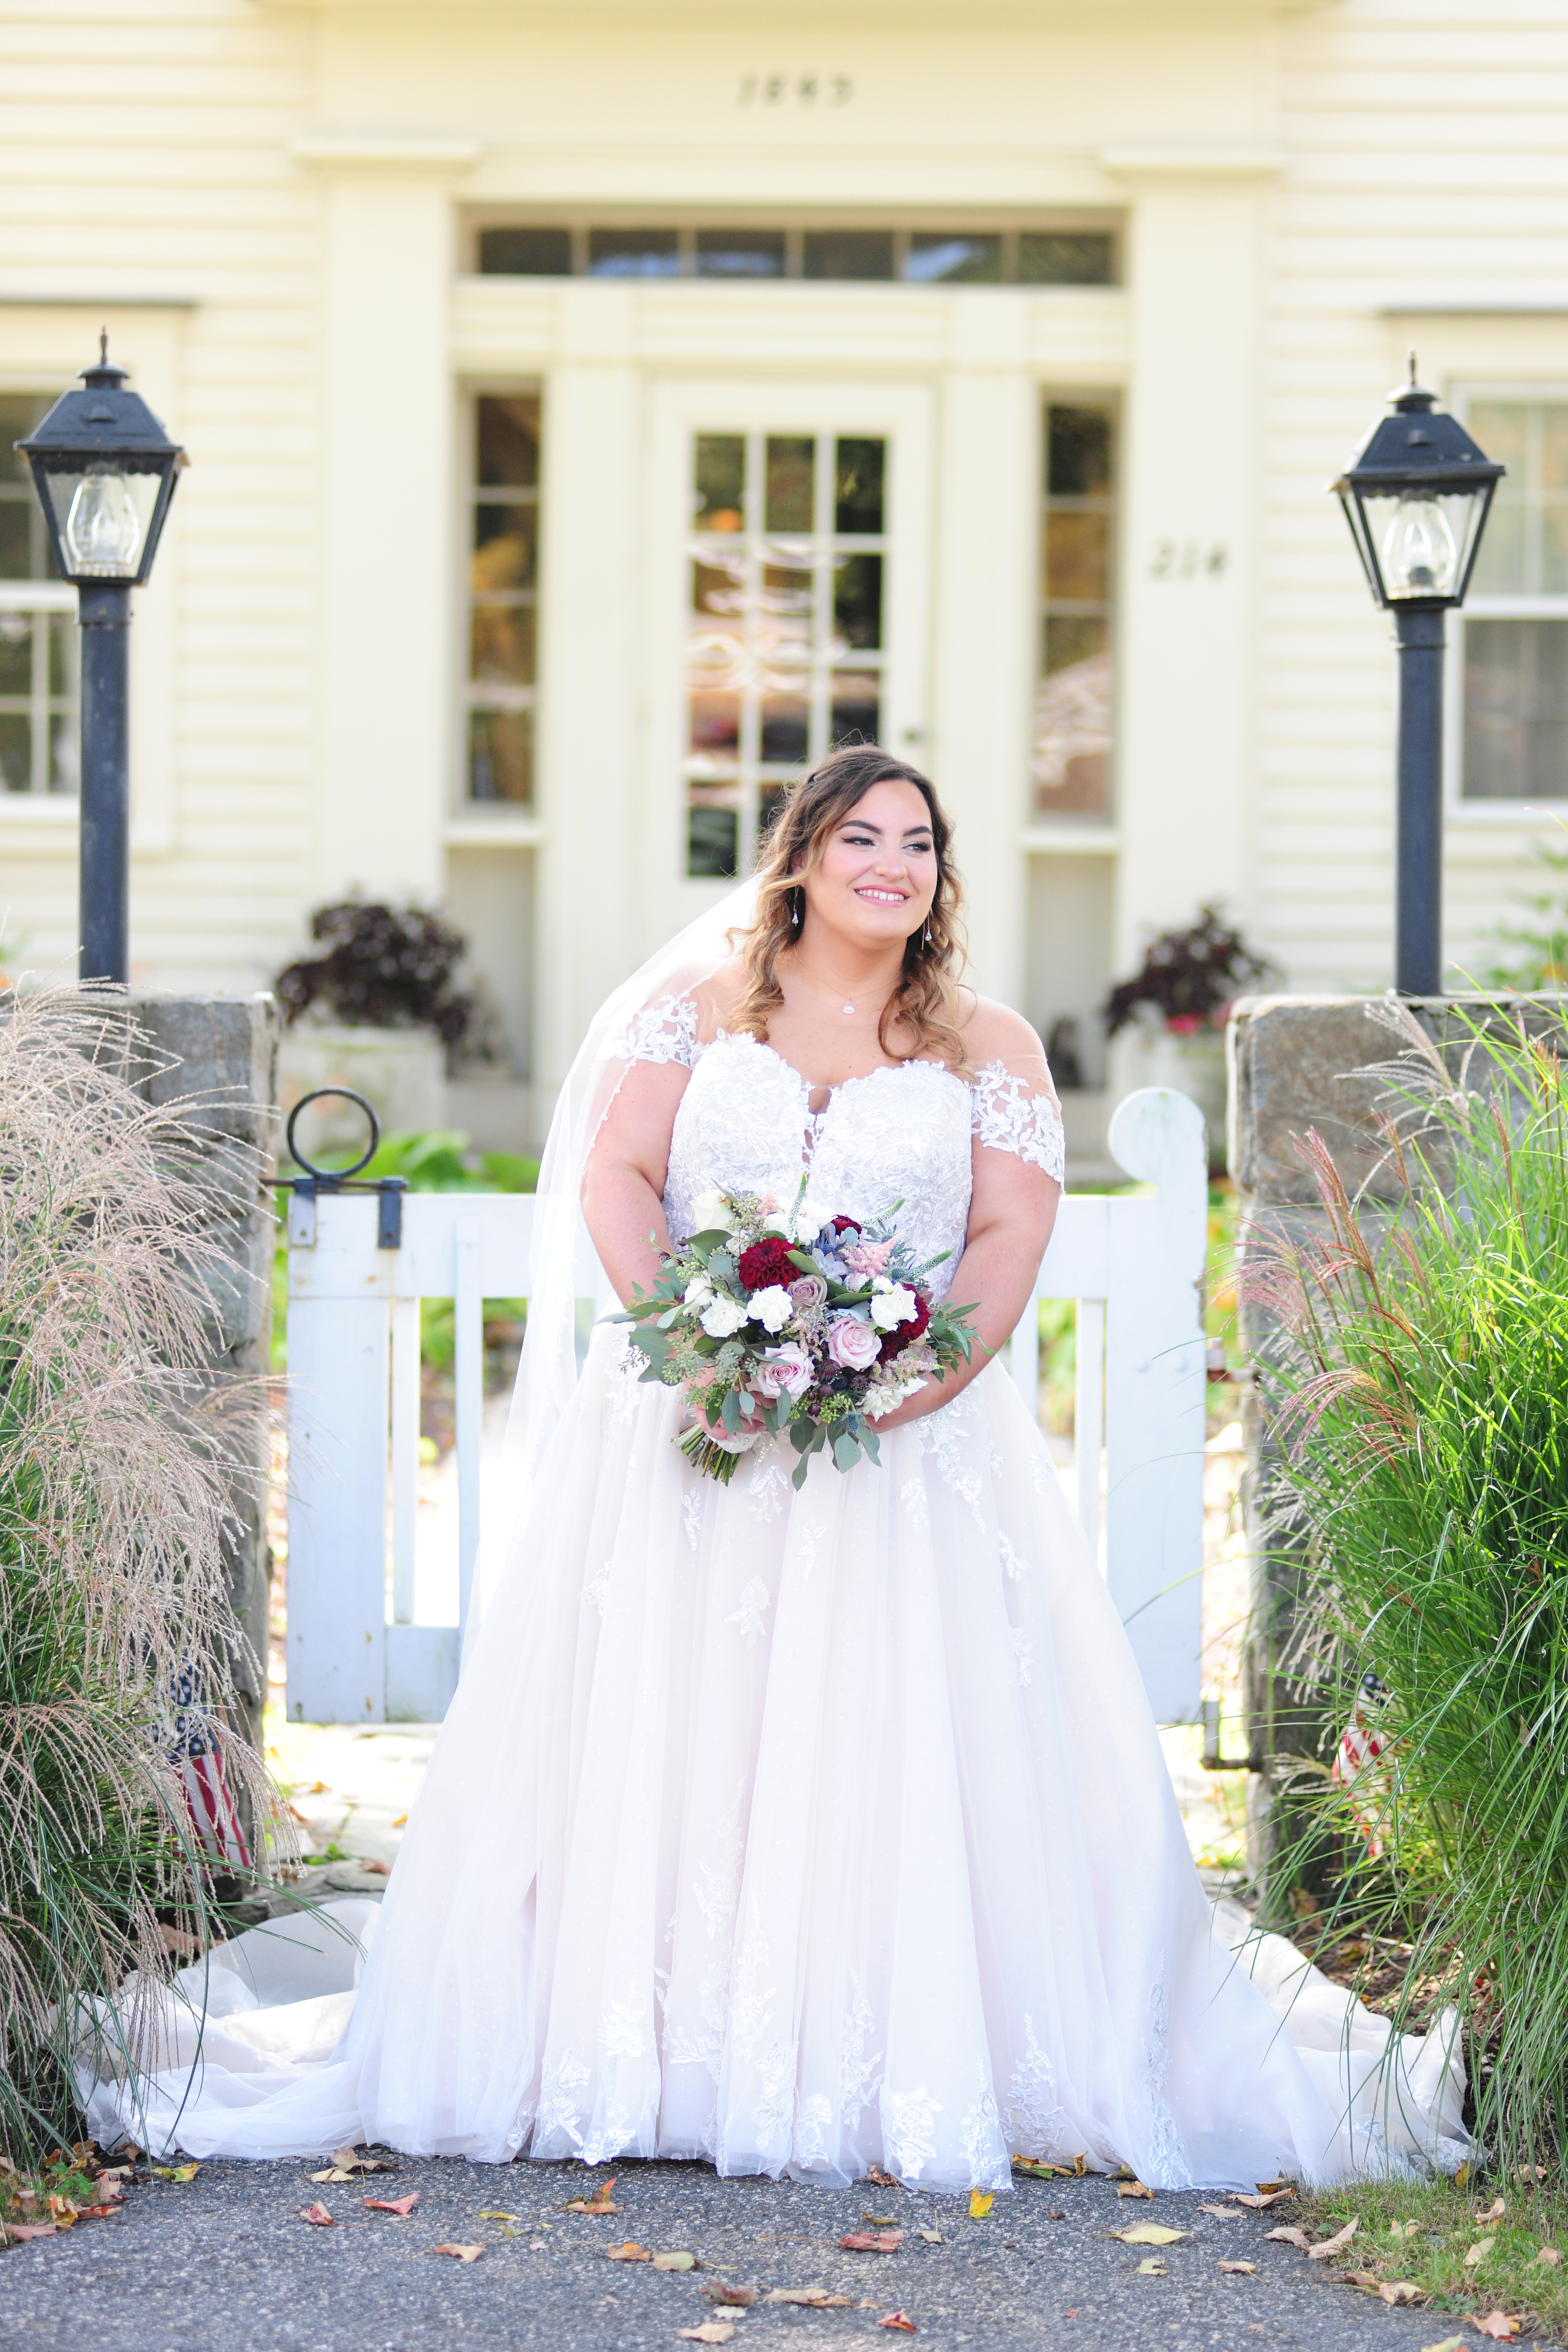 Wedding Photography at Candlelight Farms, New Milford, CT